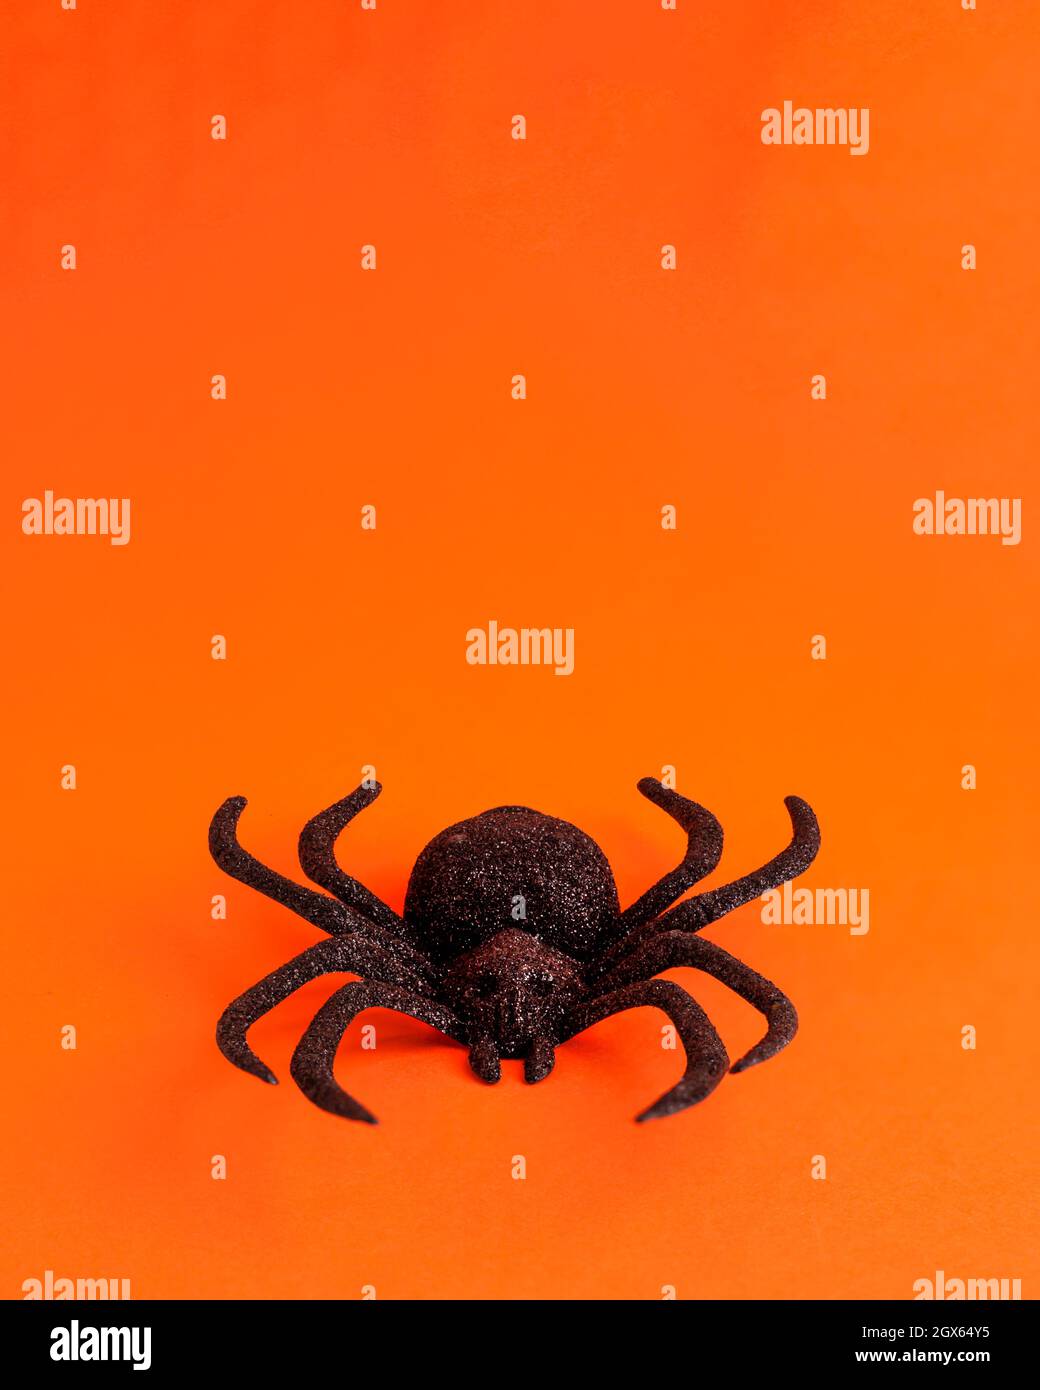 One big black horror spider on orange backdrop with copy space. Halloween decoration spooky background concept for holidays. Stock Photo